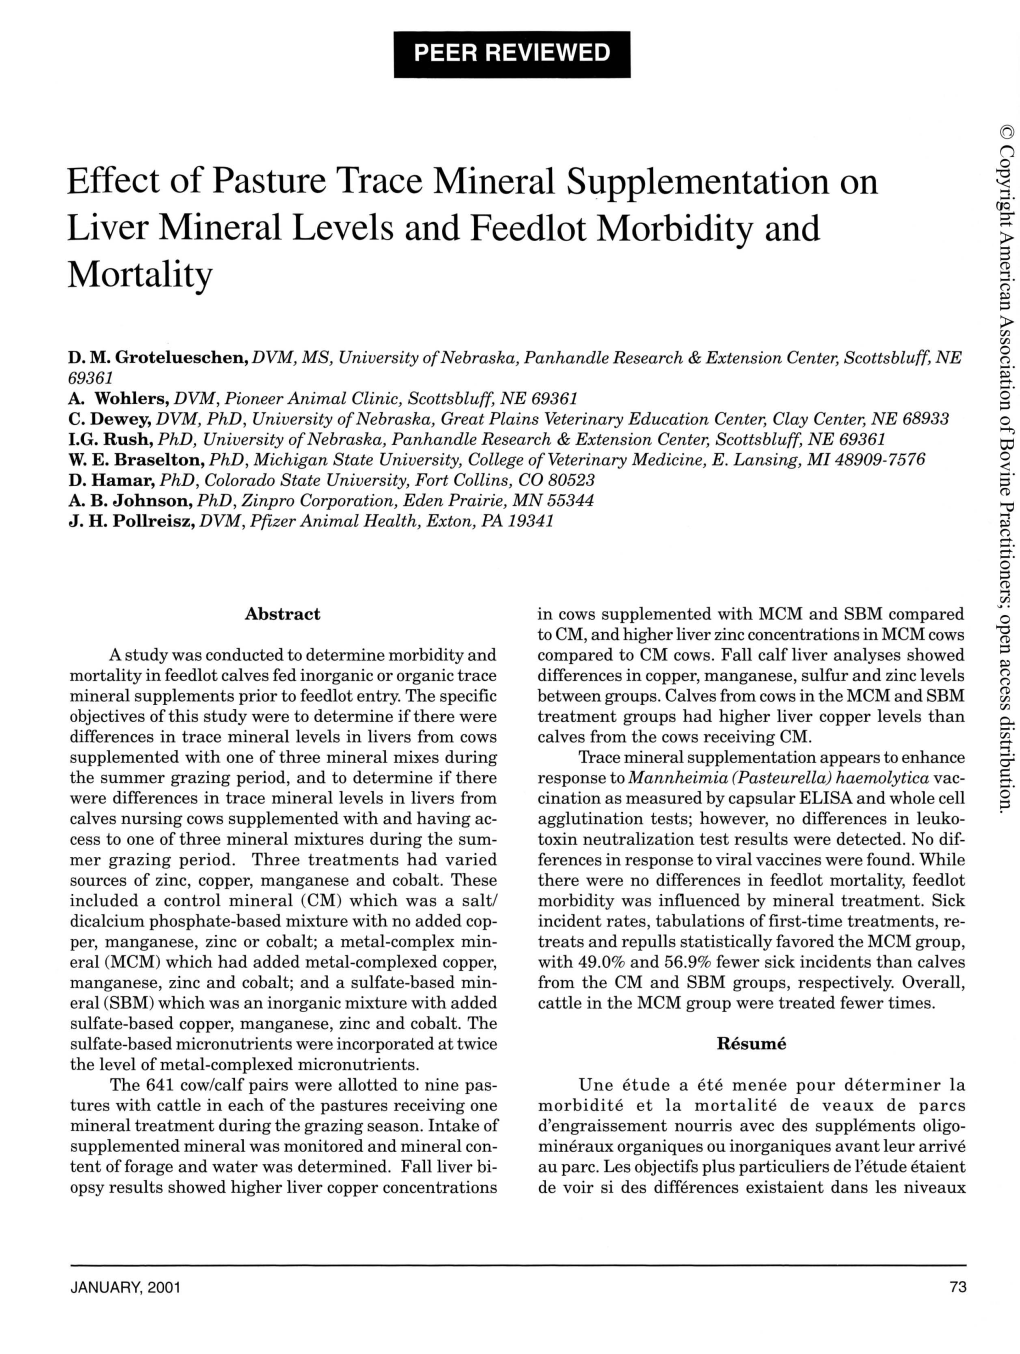 Effect of Pasture Trace Mineral Supplelllentation on Liver Mineral Levels and Feedlot Morbidity and Mortality